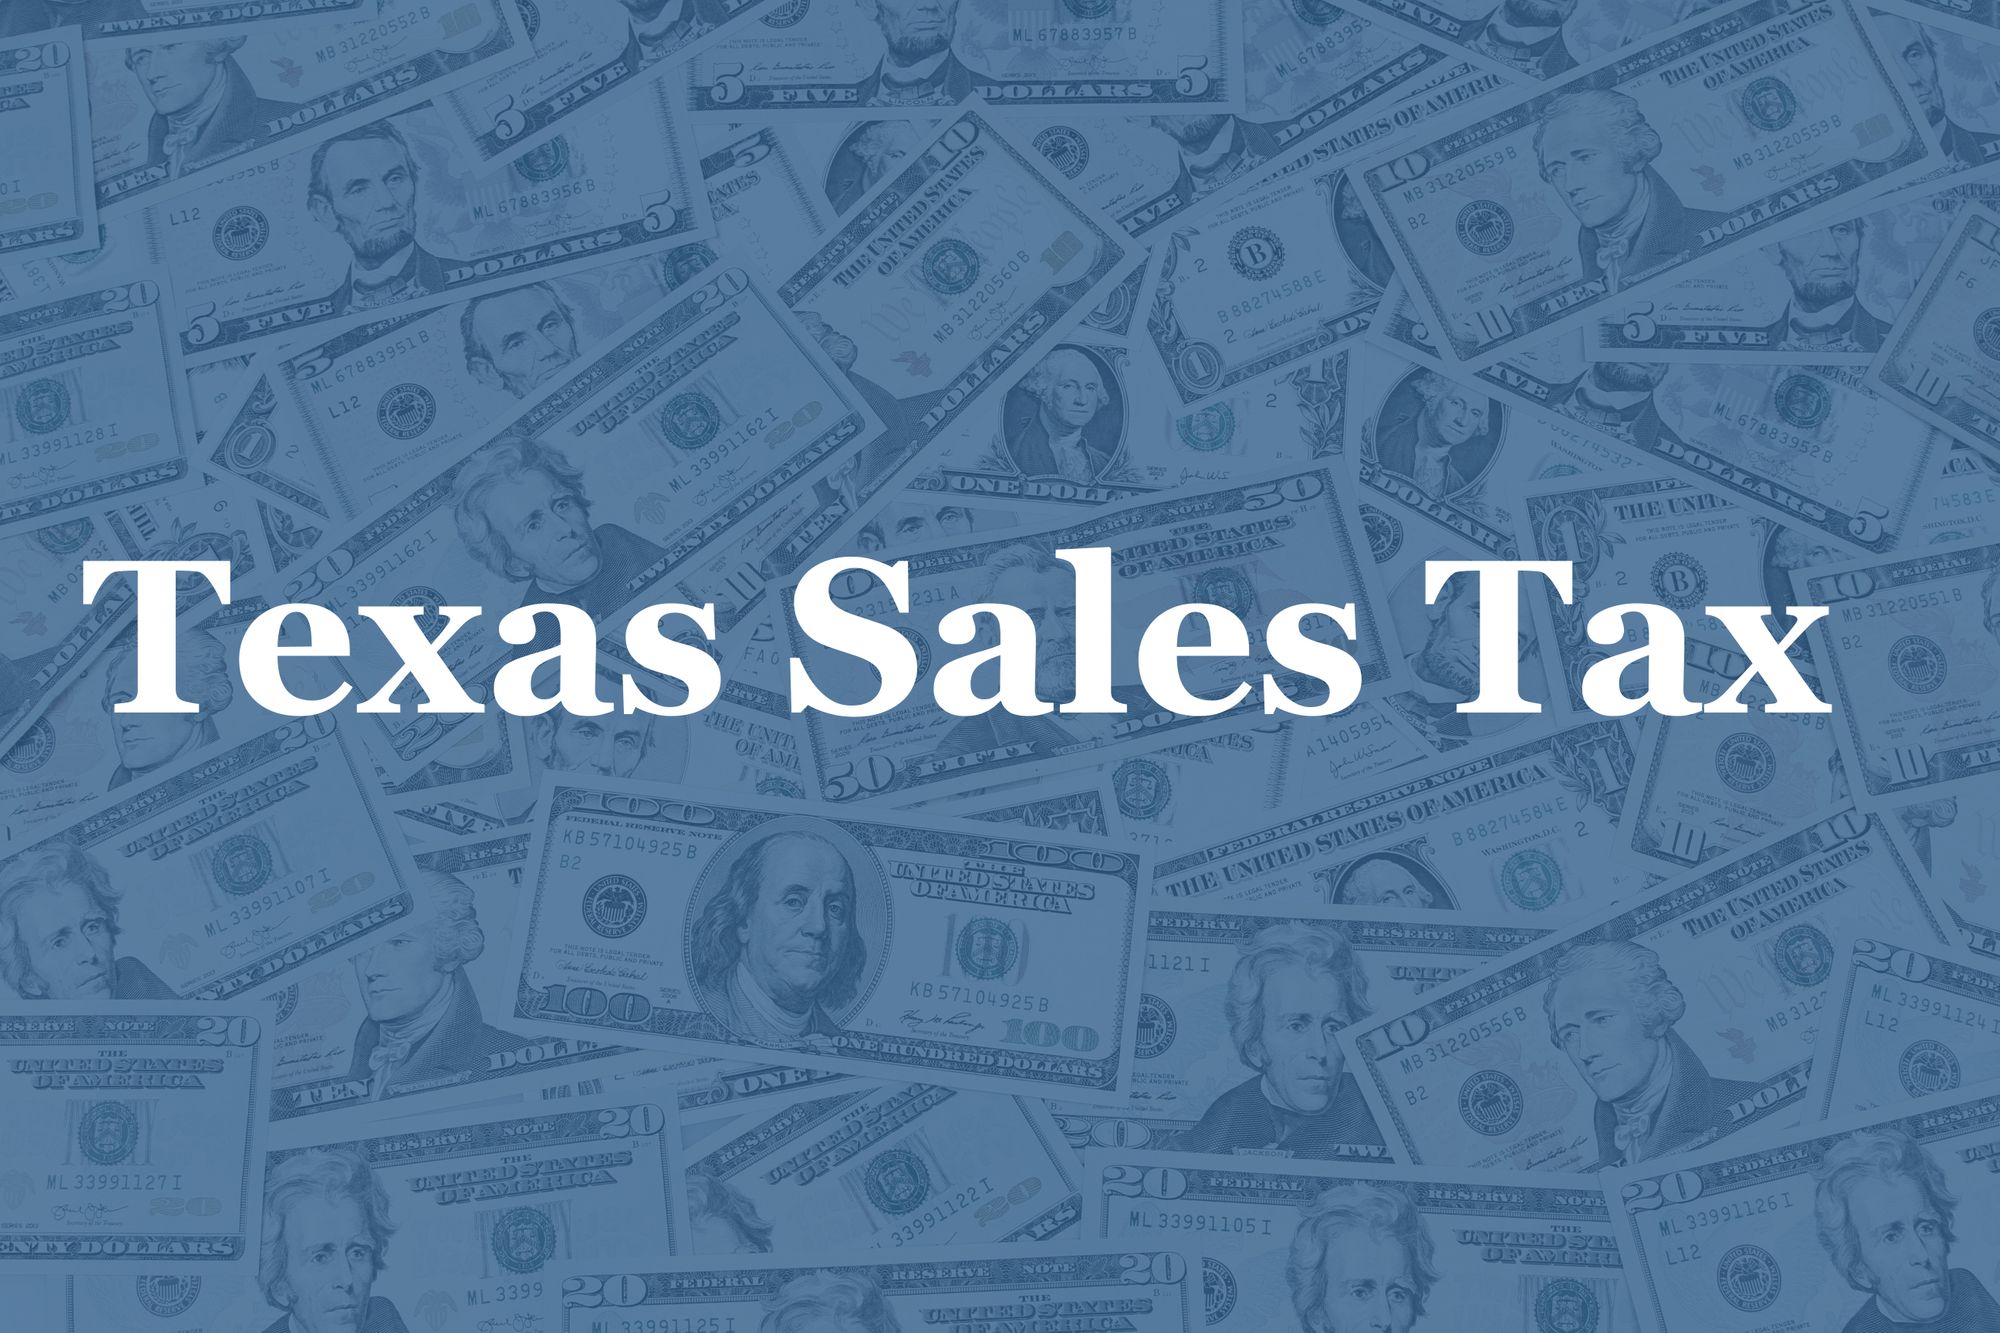 Texas sales tax revenue declined 6.5% versus last June as state reopened for business